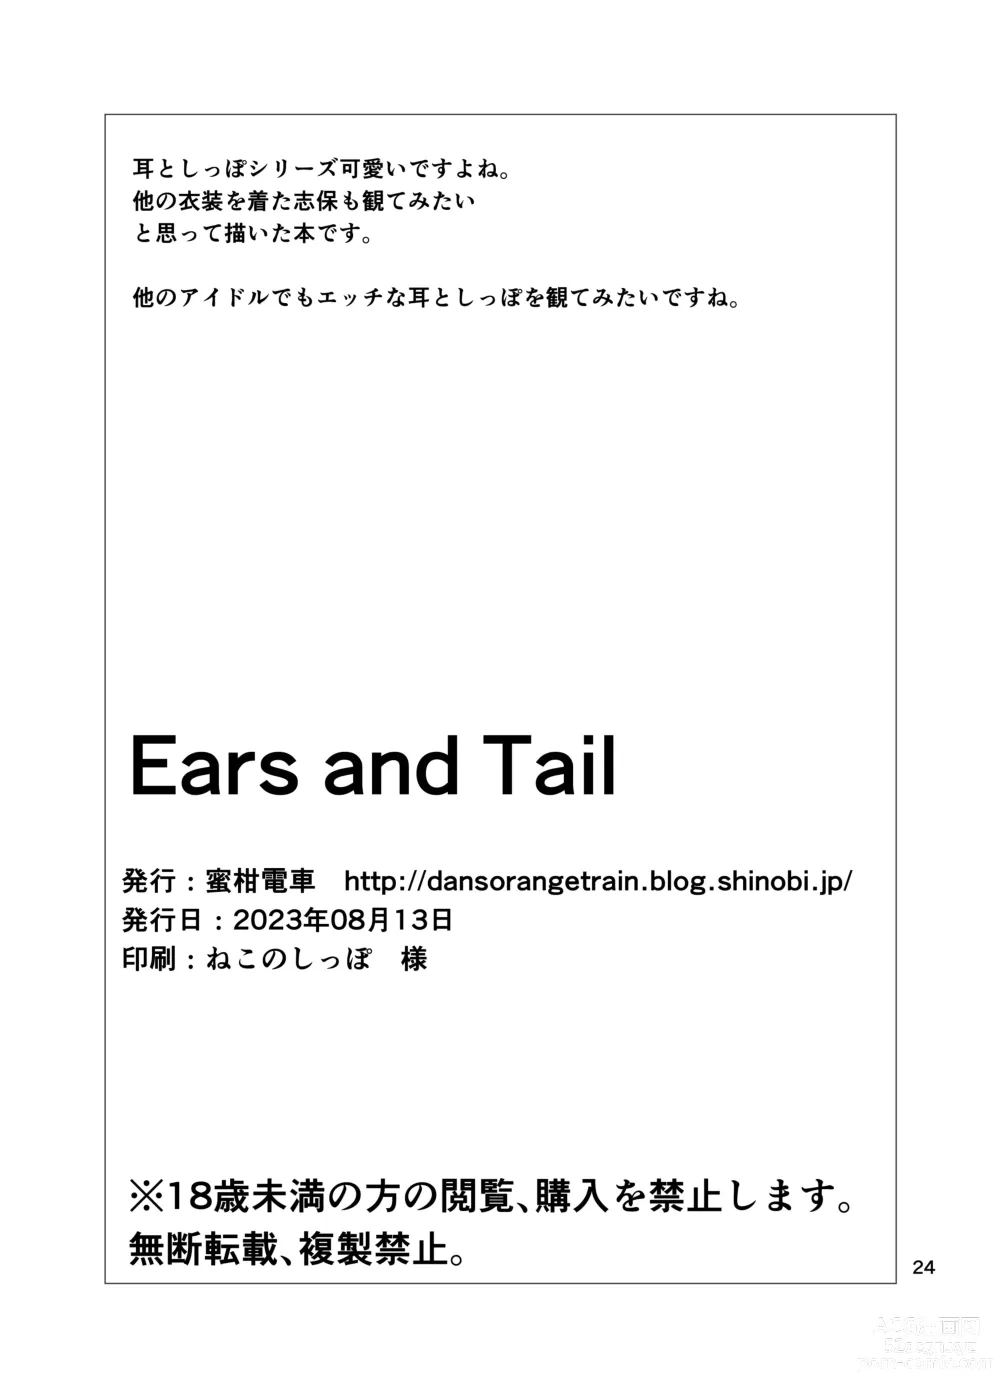 Page 25 of doujinshi Ears and Tail